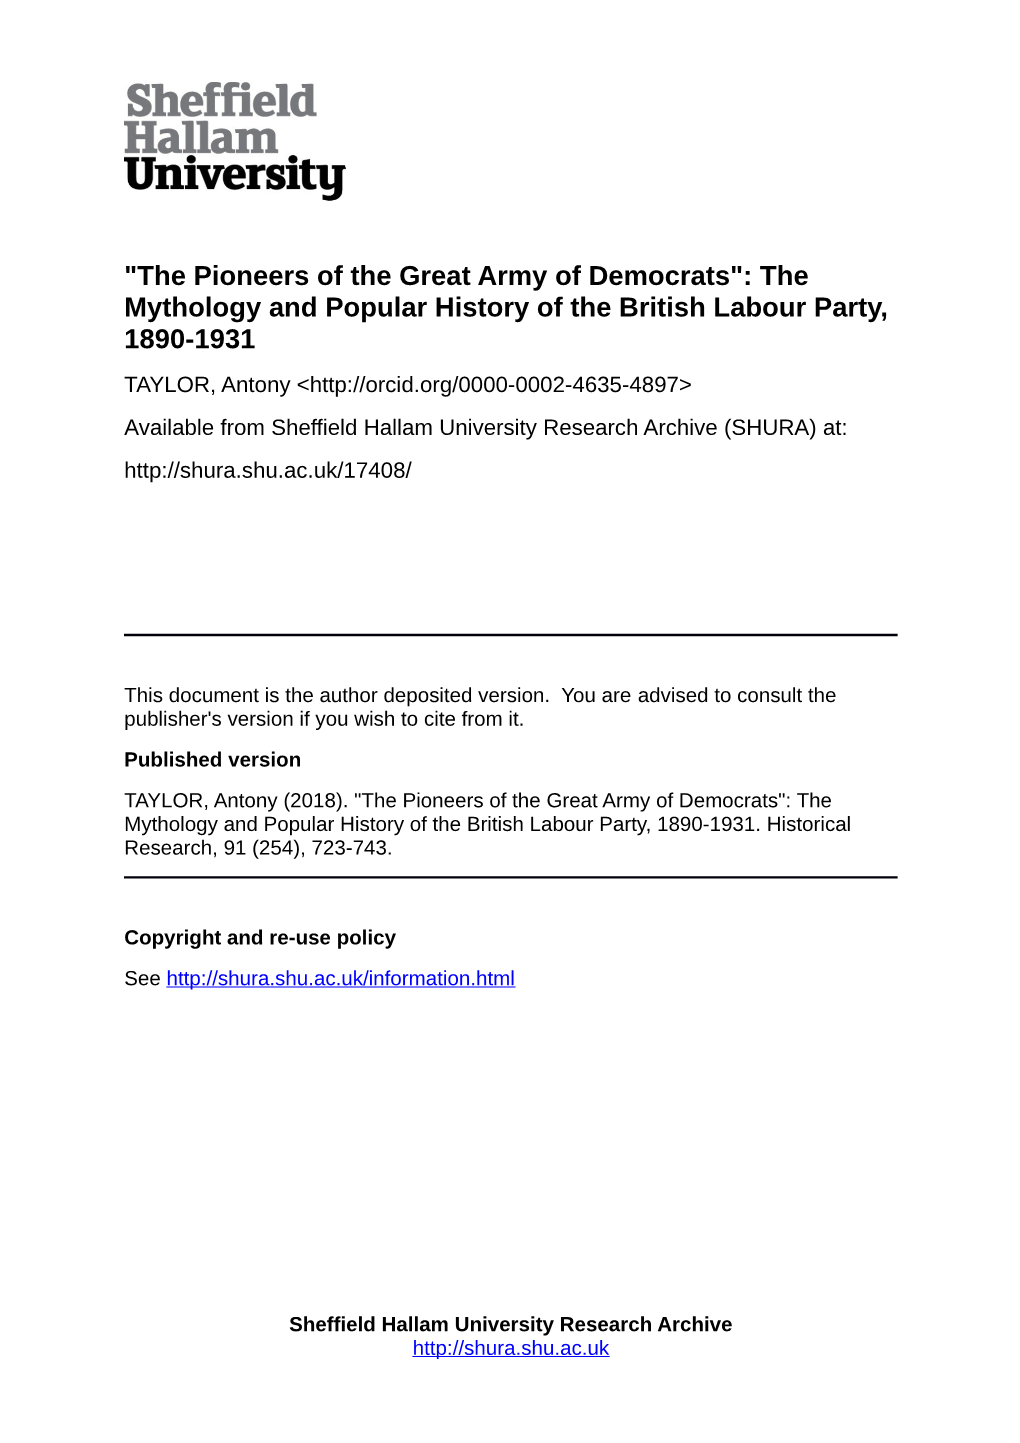 "The Pioneers of the Great Army of Democrats": the Mythology and Popular History of the British Labour Party, 1890-193